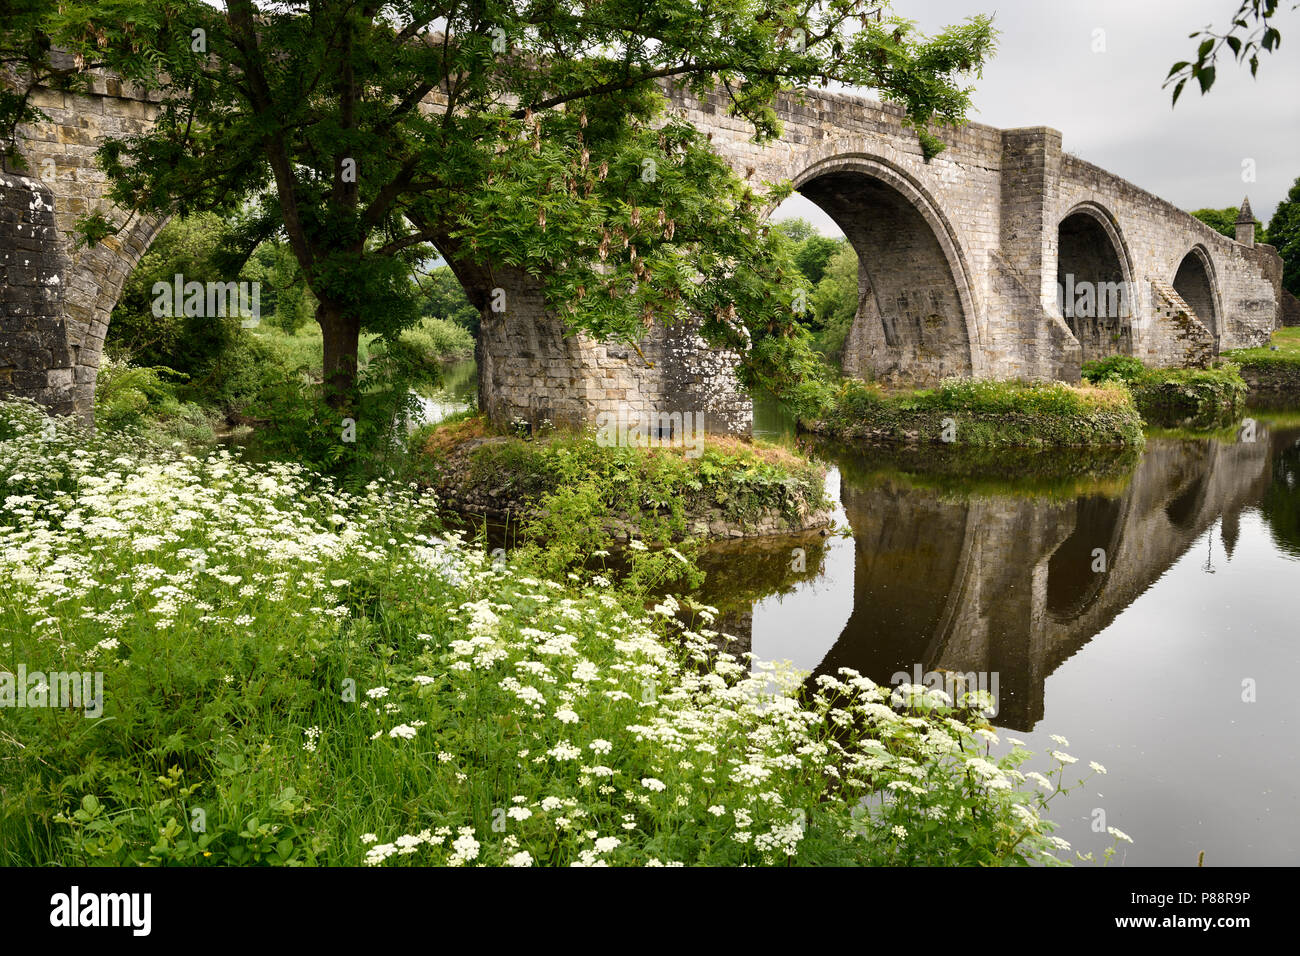 Old Stirling Bridge reflected in the River Forth with medieval stone arches and Queen Annes Lace white flowers on riverbank Stirling Scotland UK Stock Photo